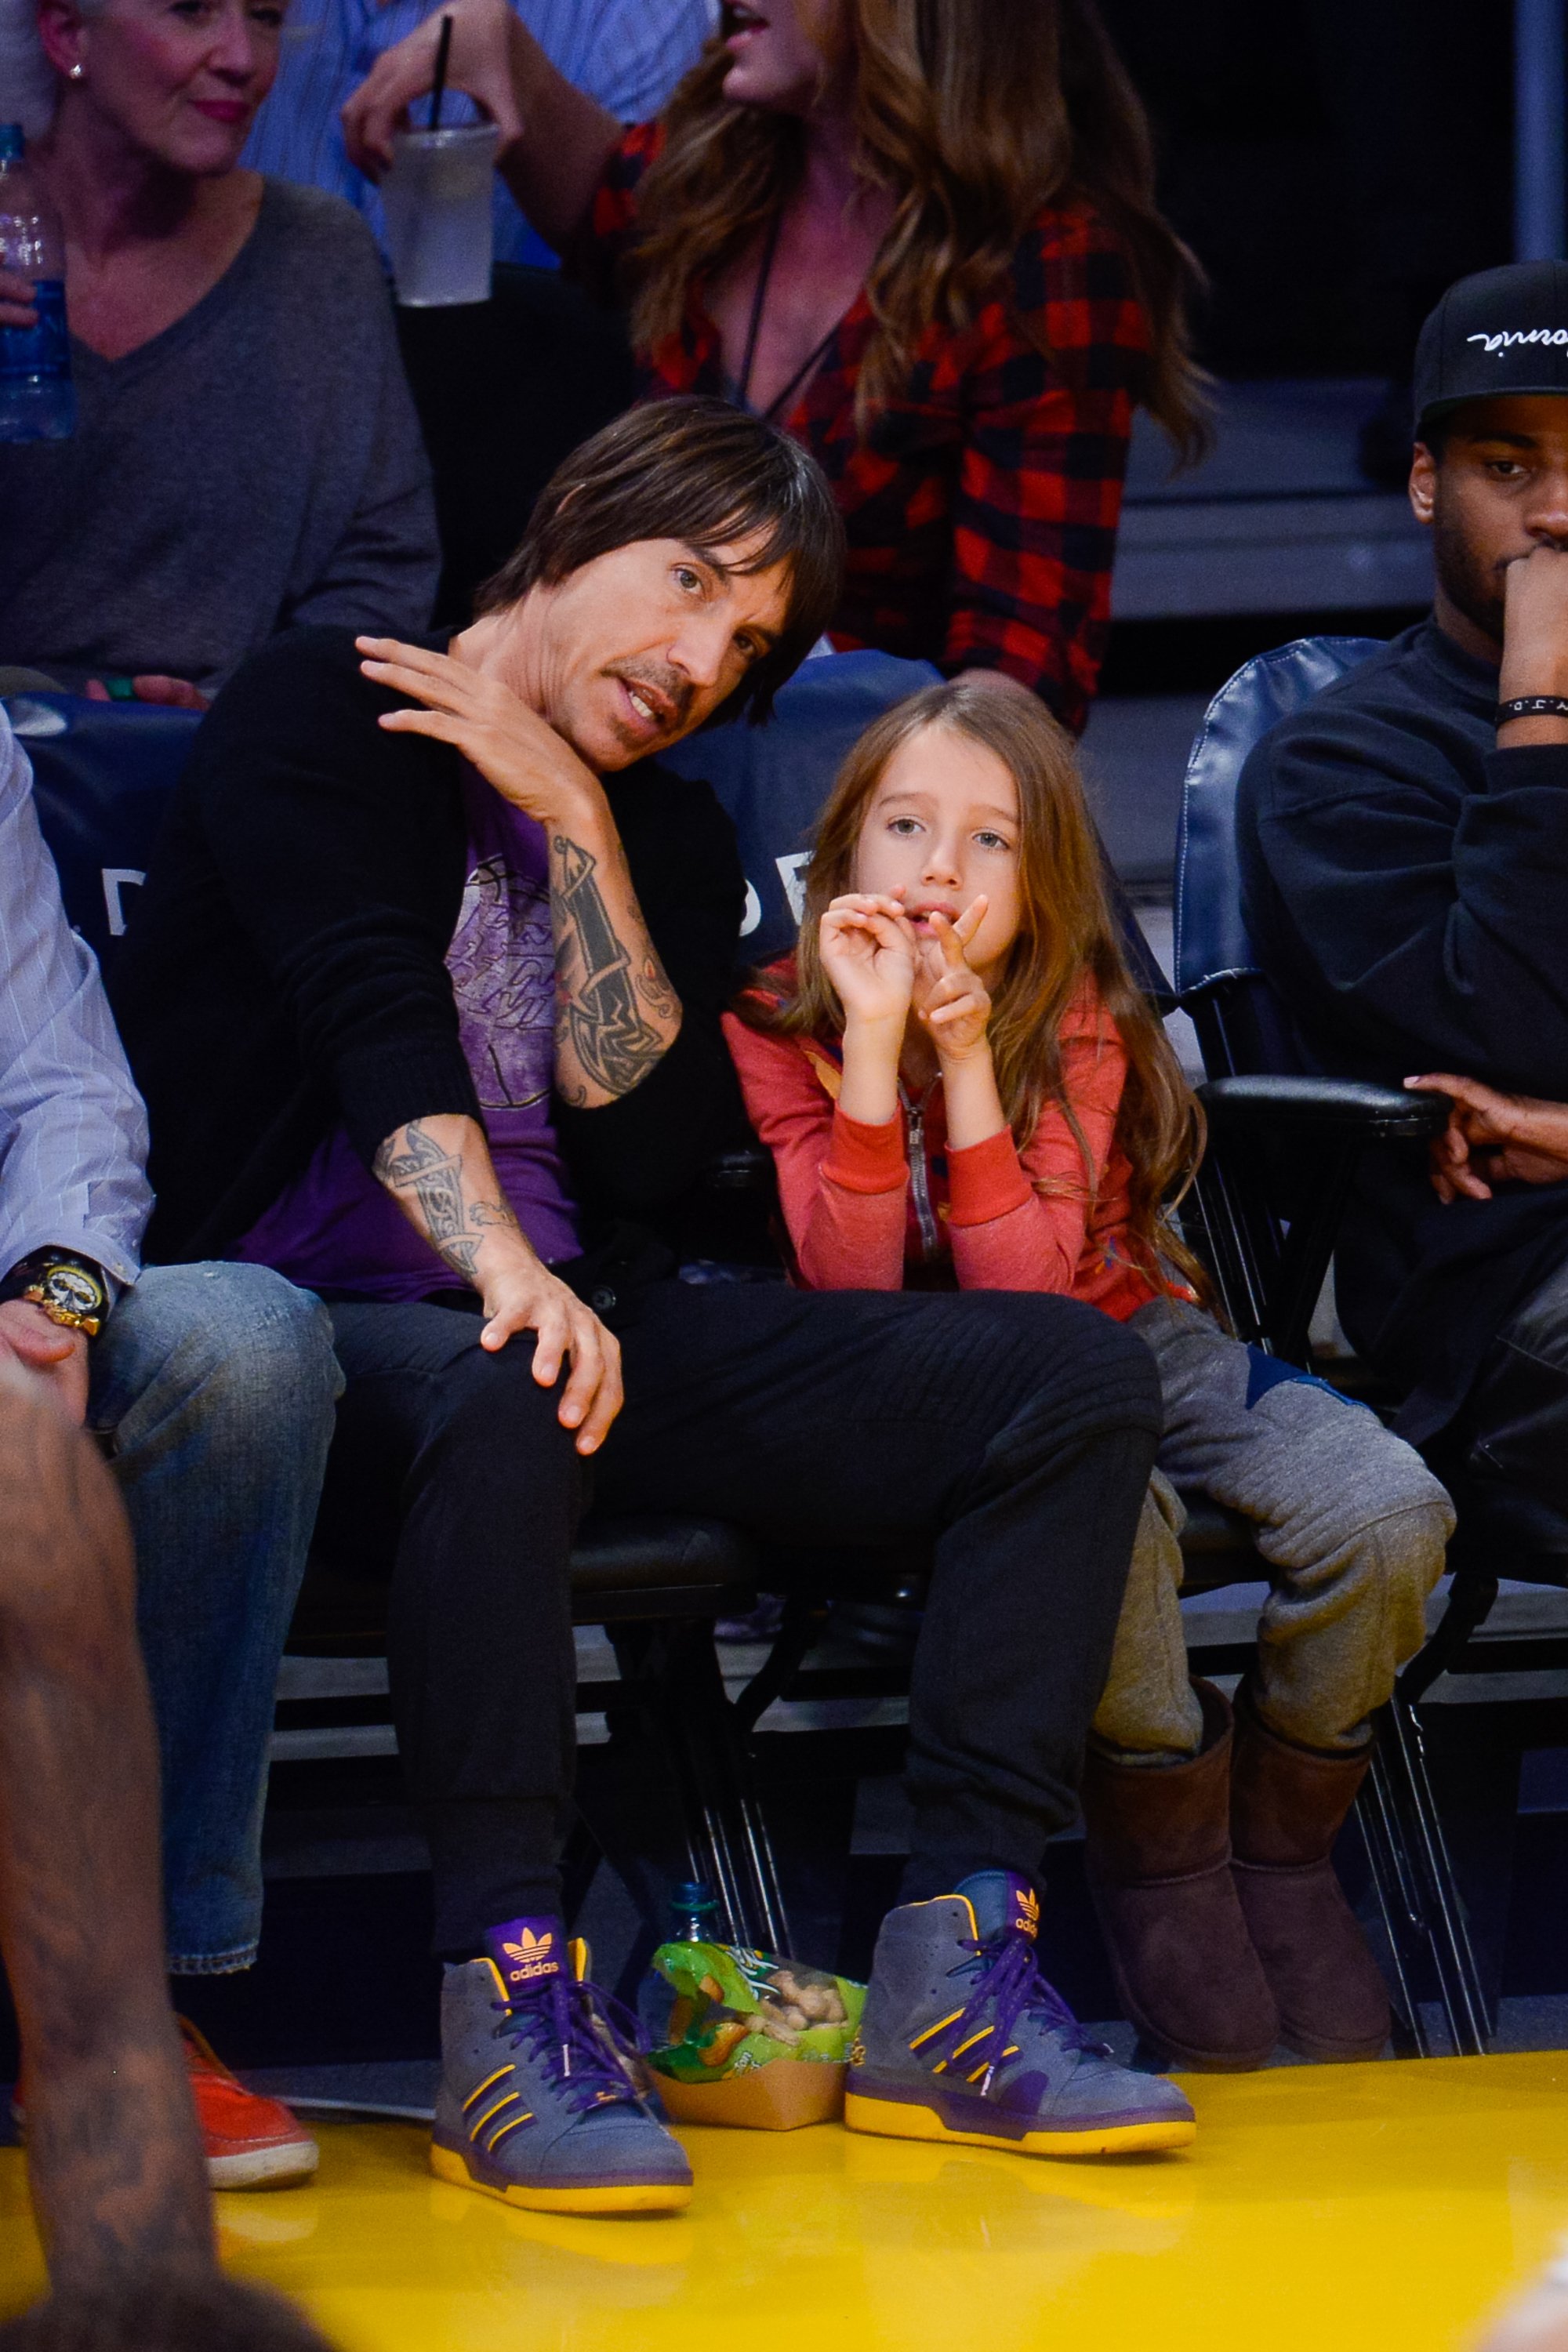 Anthony Kiedis and his son Everly Bear Kiedis at a basketball game between the New Orleans Pelicans and the Los Angeles Lakers at Staples Center on December 7, 2014 in Los Angeles, California. | Source: Getty Images